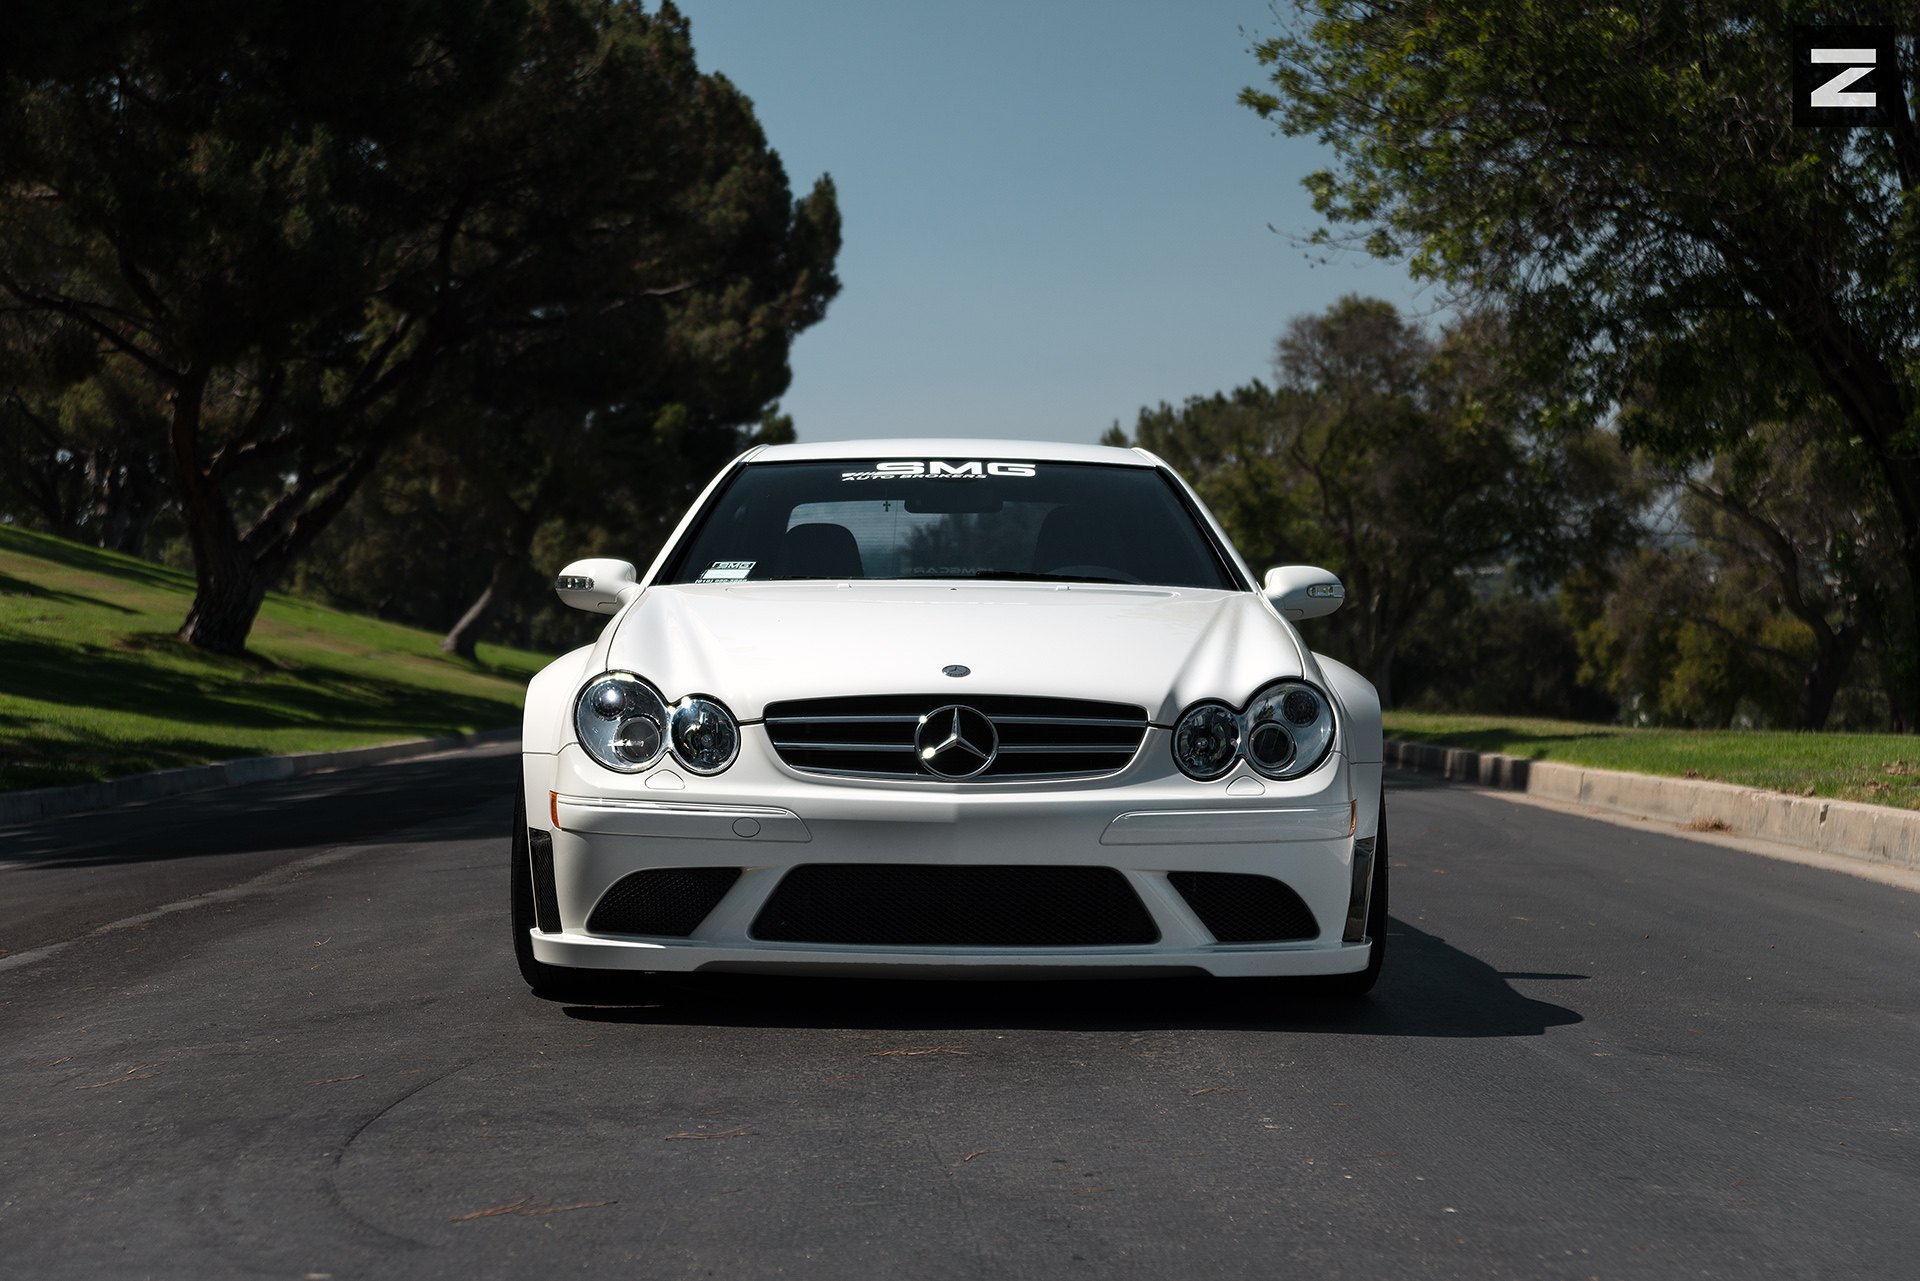 Chrome Grille on White Mercedes CLK Class - Photo by Zito Wheels